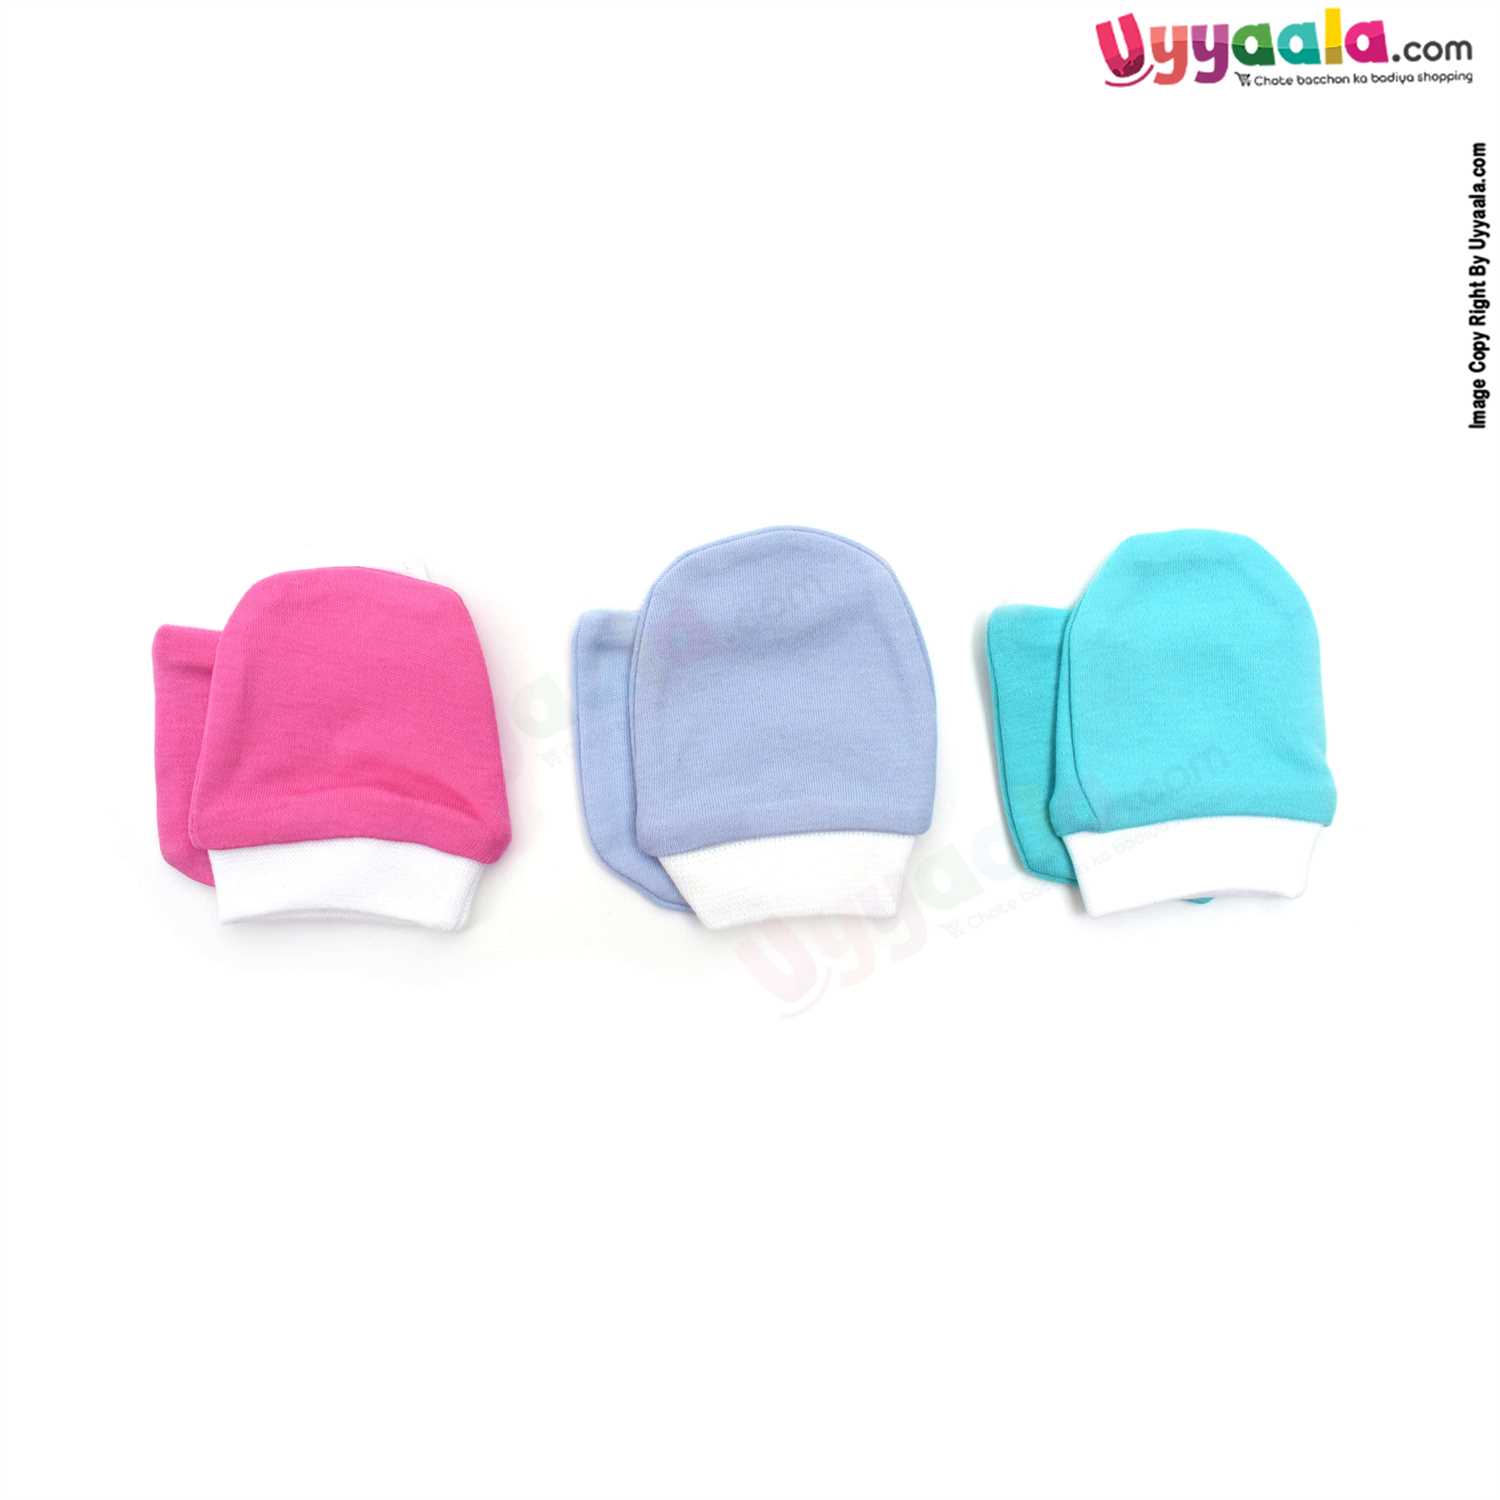 New Born Hosiery Cotton Socks Pack of 3, 0-3m Age - MultiColor